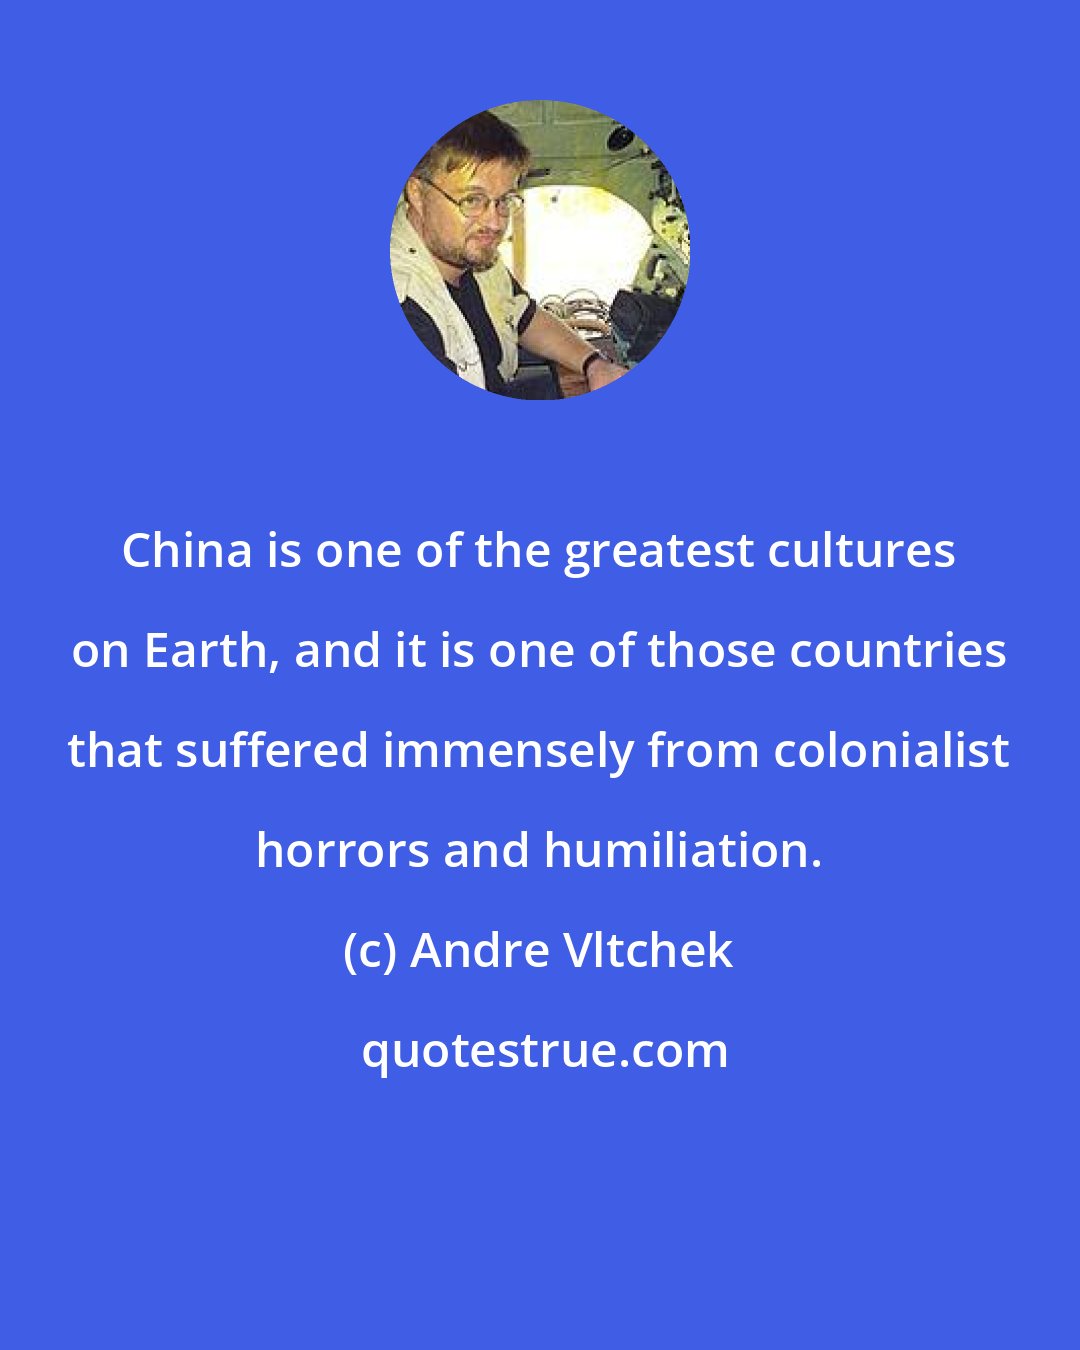 Andre Vltchek: China is one of the greatest cultures on Earth, and it is one of those countries that suffered immensely from colonialist horrors and humiliation.